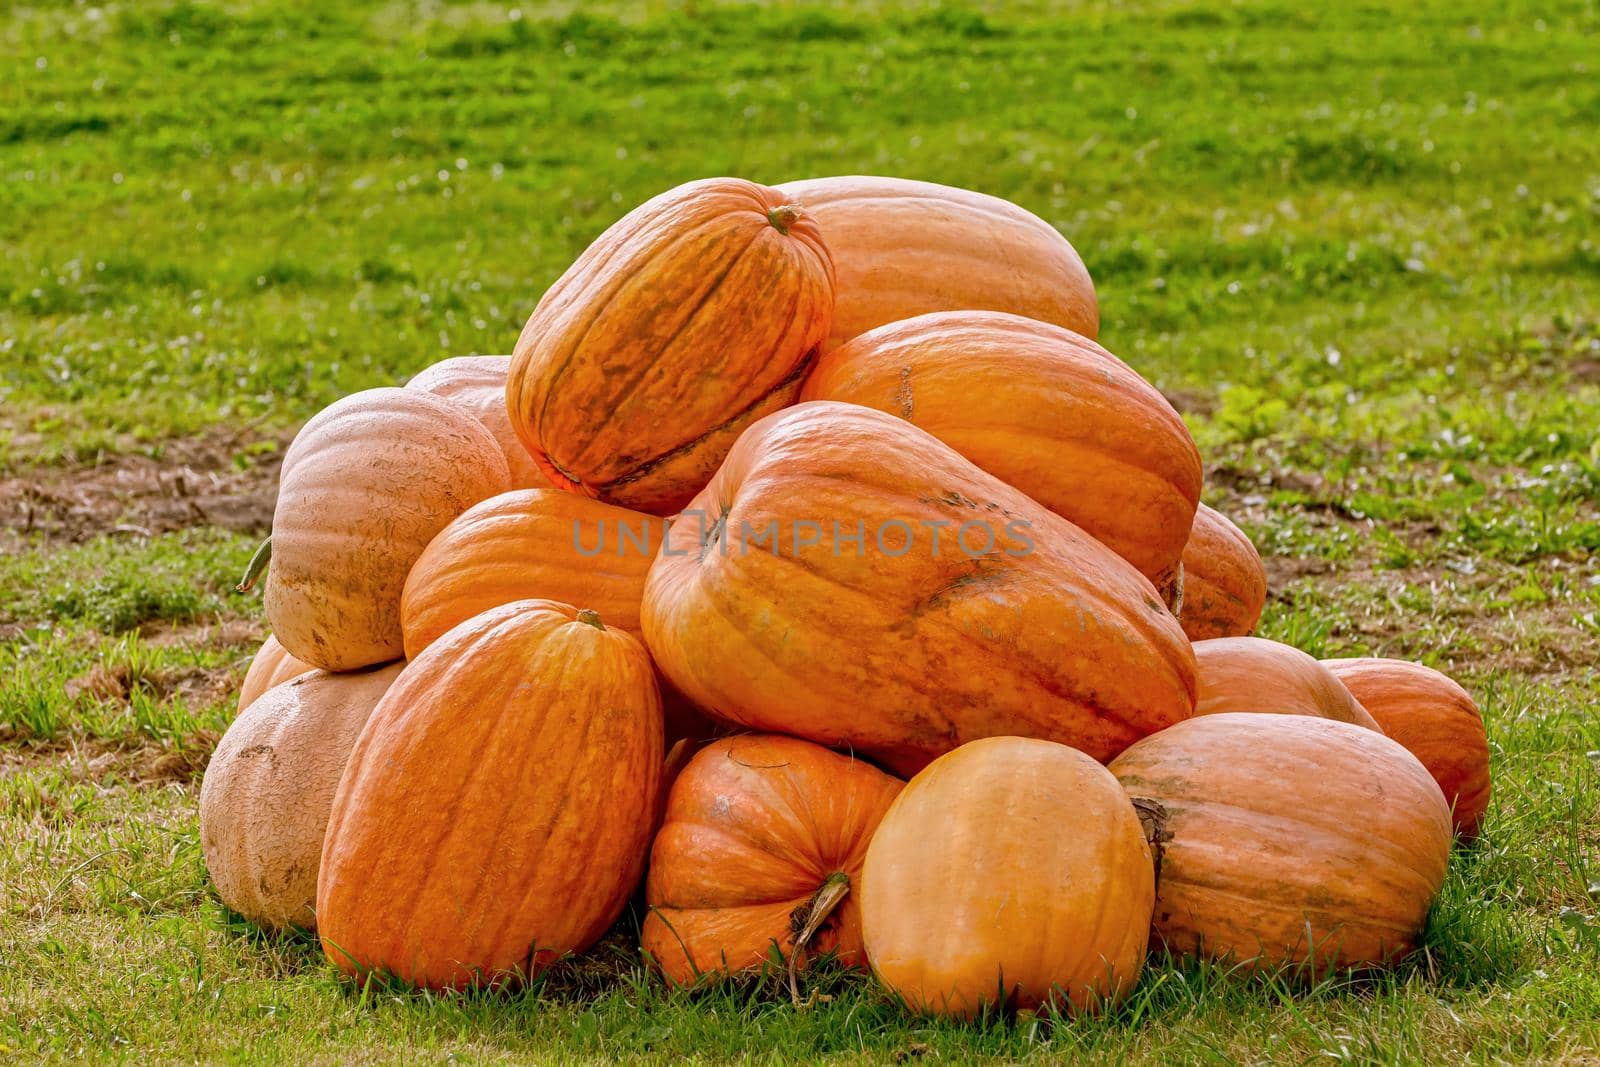 Pumpkins on the lawn by SNR